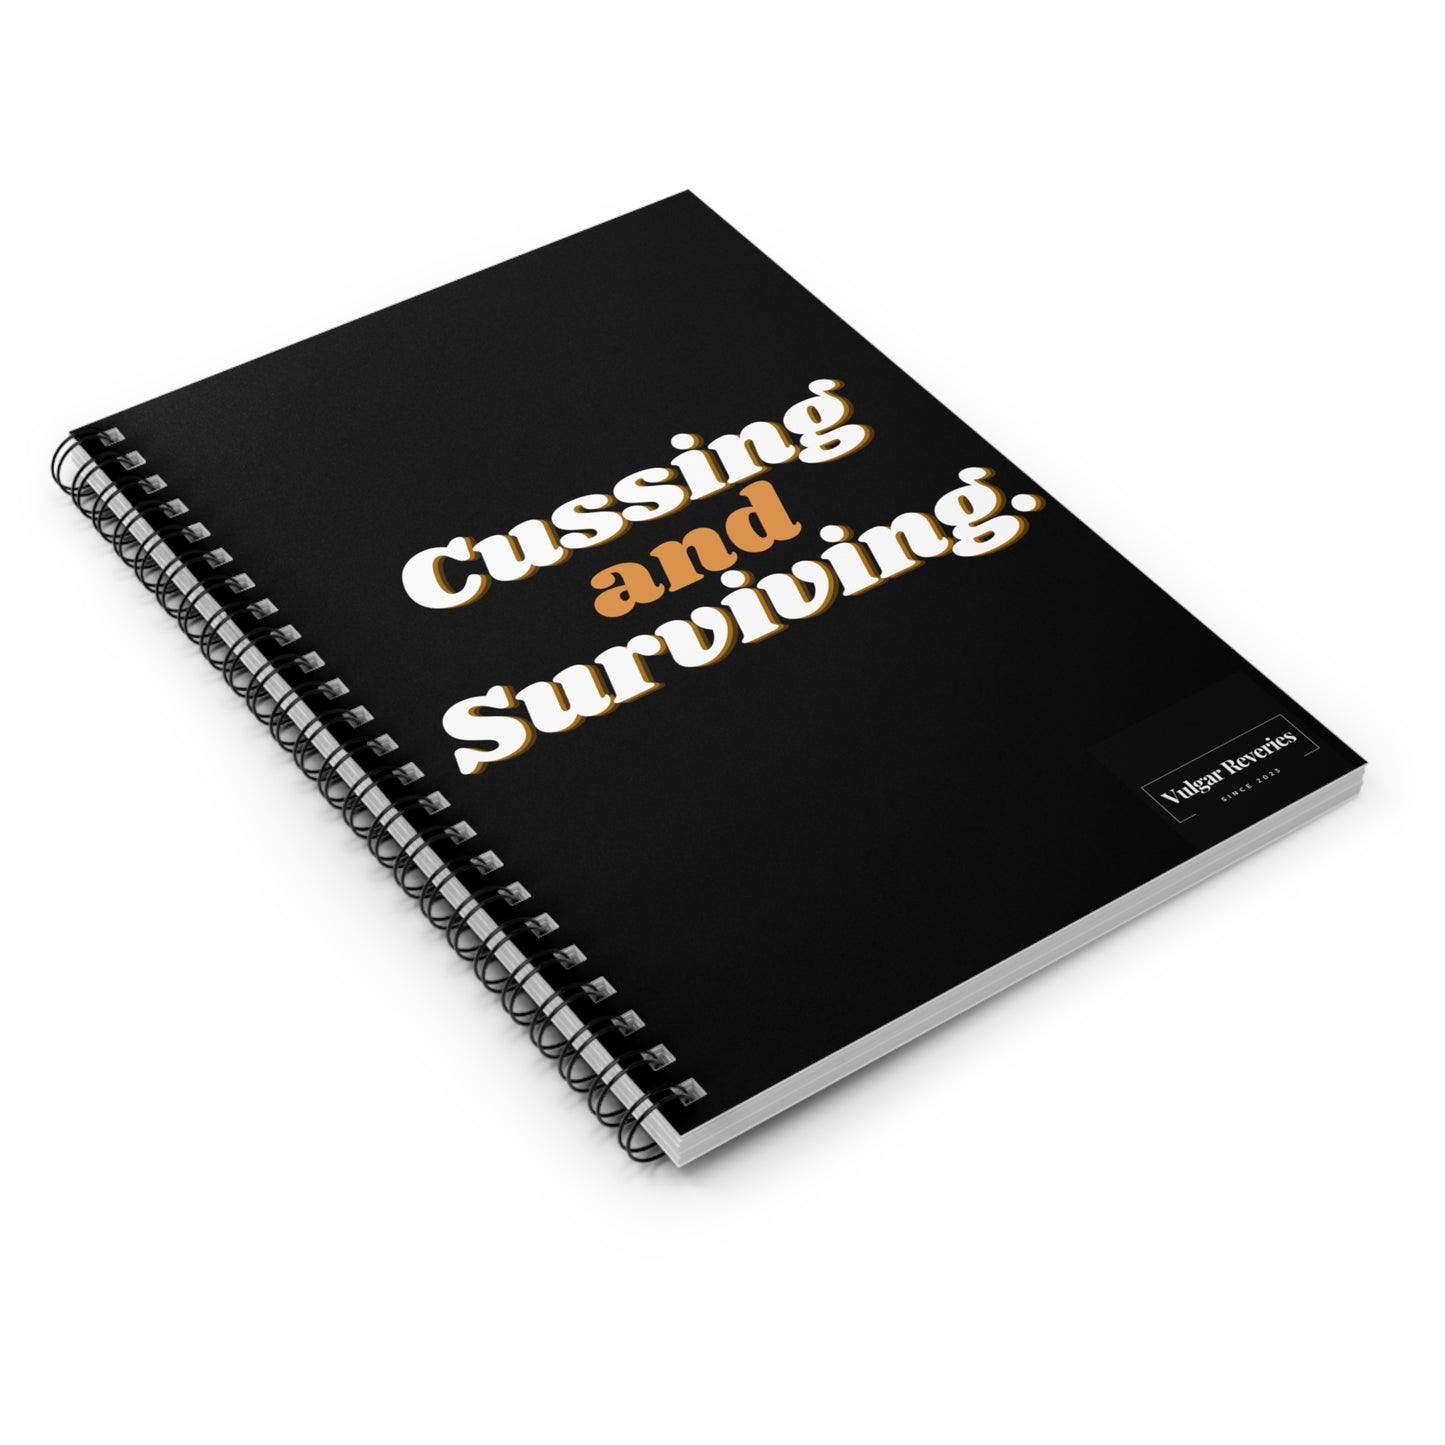 Cussing and Surviving - Spiral Notebook - Ruled Line